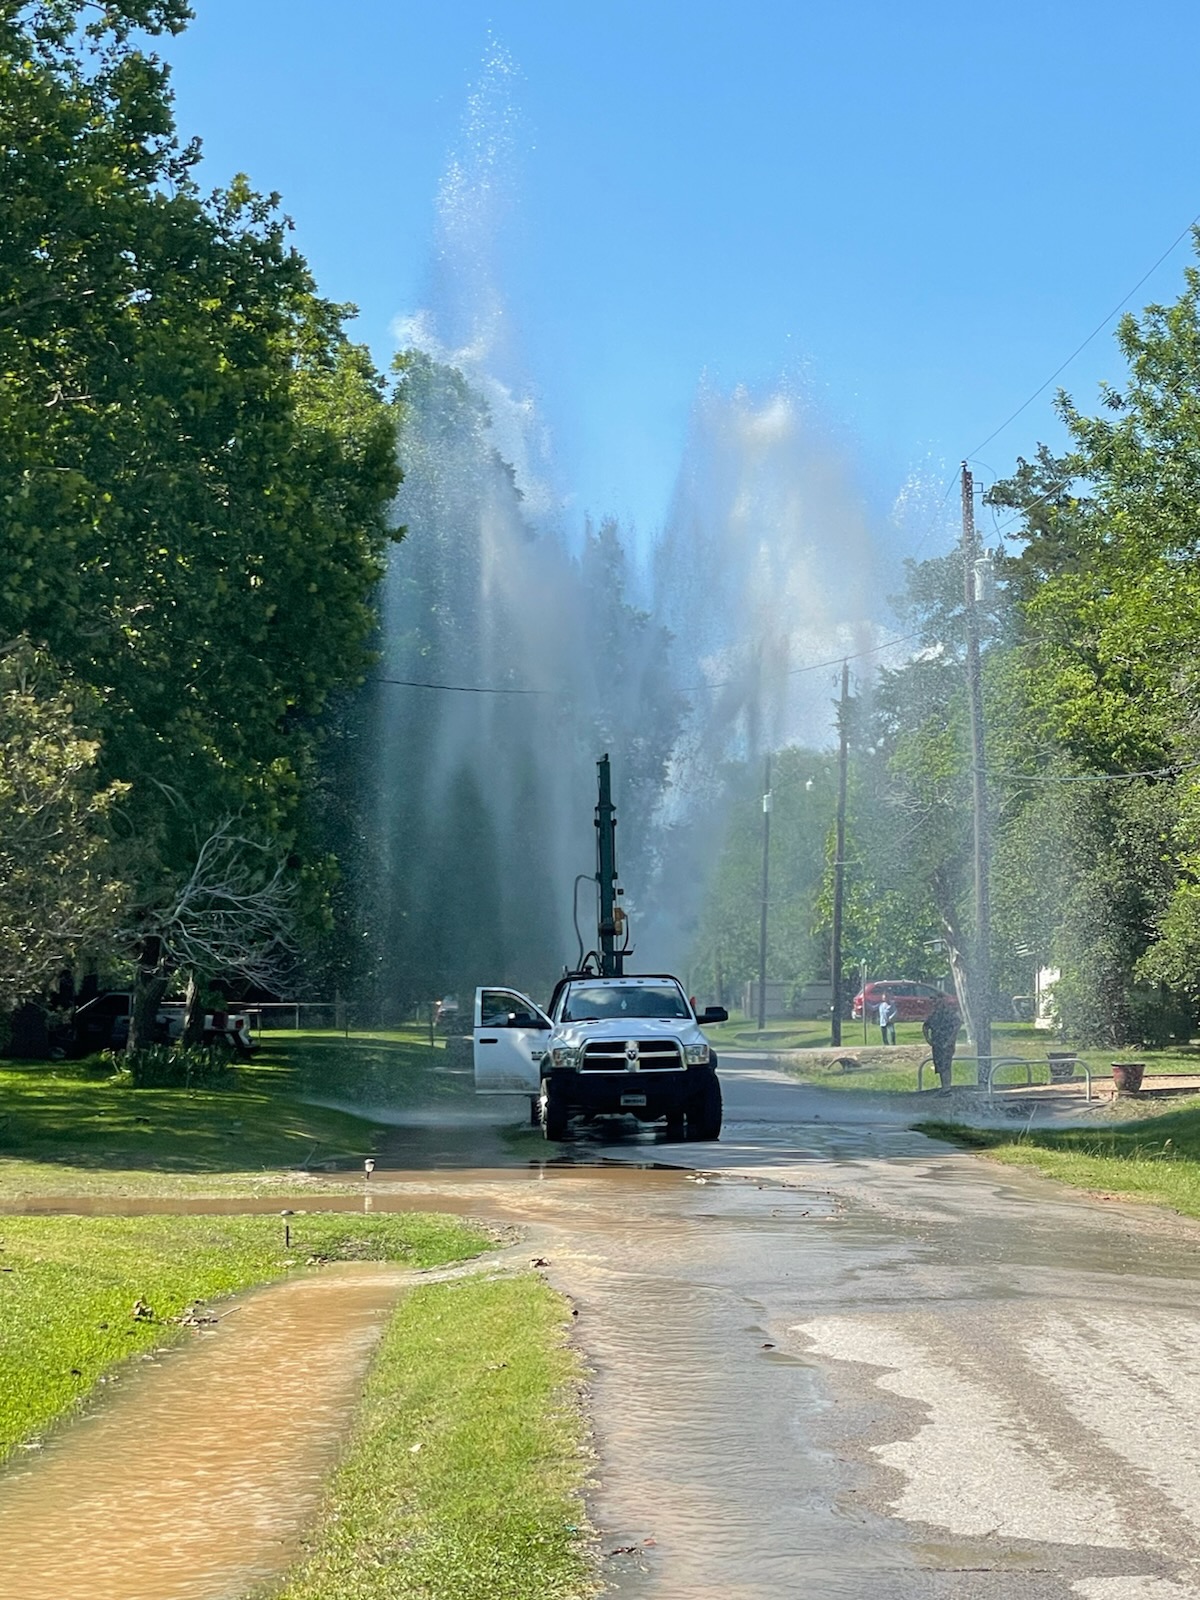 A contractor accidentally hit a water line in Moulton, sending a gyser shooting several feet into sky last week. City leaders said it was a good test of the SCADA equipment installed on the water works last year, because it notified crews instantly so the could shut down the leak quickly. 